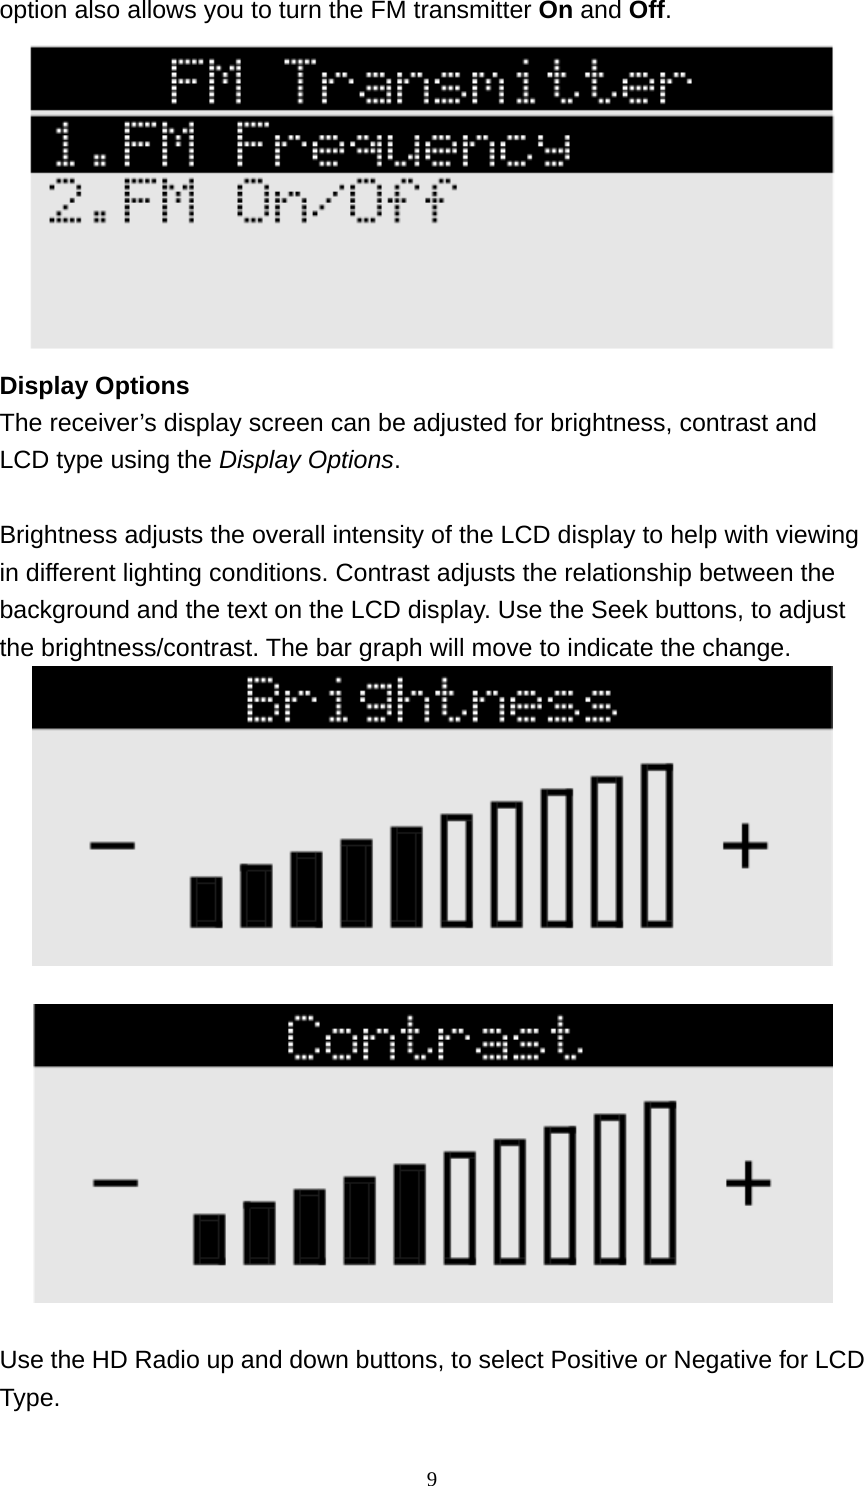  9option also allows you to turn the FM transmitter On and Off.  Display Options The receiver’s display screen can be adjusted for brightness, contrast and LCD type using the Display Options.  Brightness adjusts the overall intensity of the LCD display to help with viewing in different lighting conditions. Contrast adjusts the relationship between the background and the text on the LCD display. Use the Seek buttons, to adjust the brightness/contrast. The bar graph will move to indicate the change.       Use the HD Radio up and down buttons, to select Positive or Negative for LCD Type. 